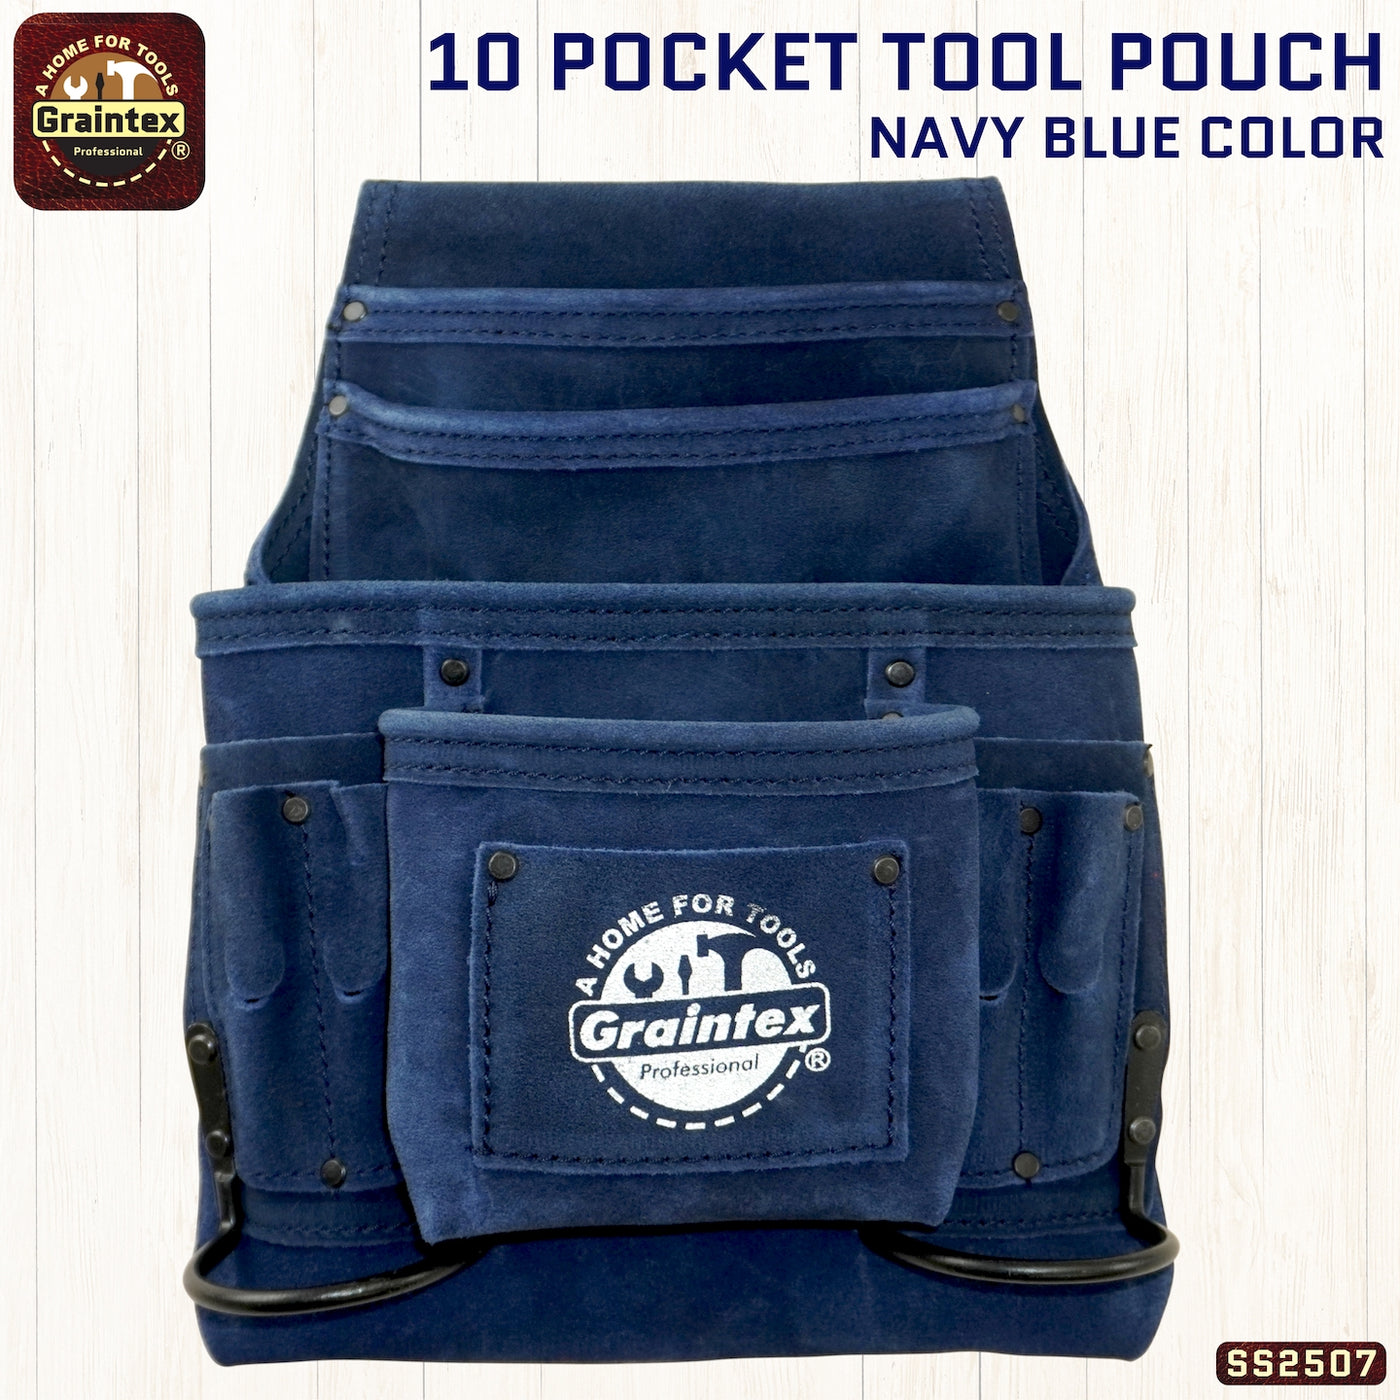 SS2507 :: 10 Pocket Nail & Tool Pouch Navy Blue Color Suede Leather